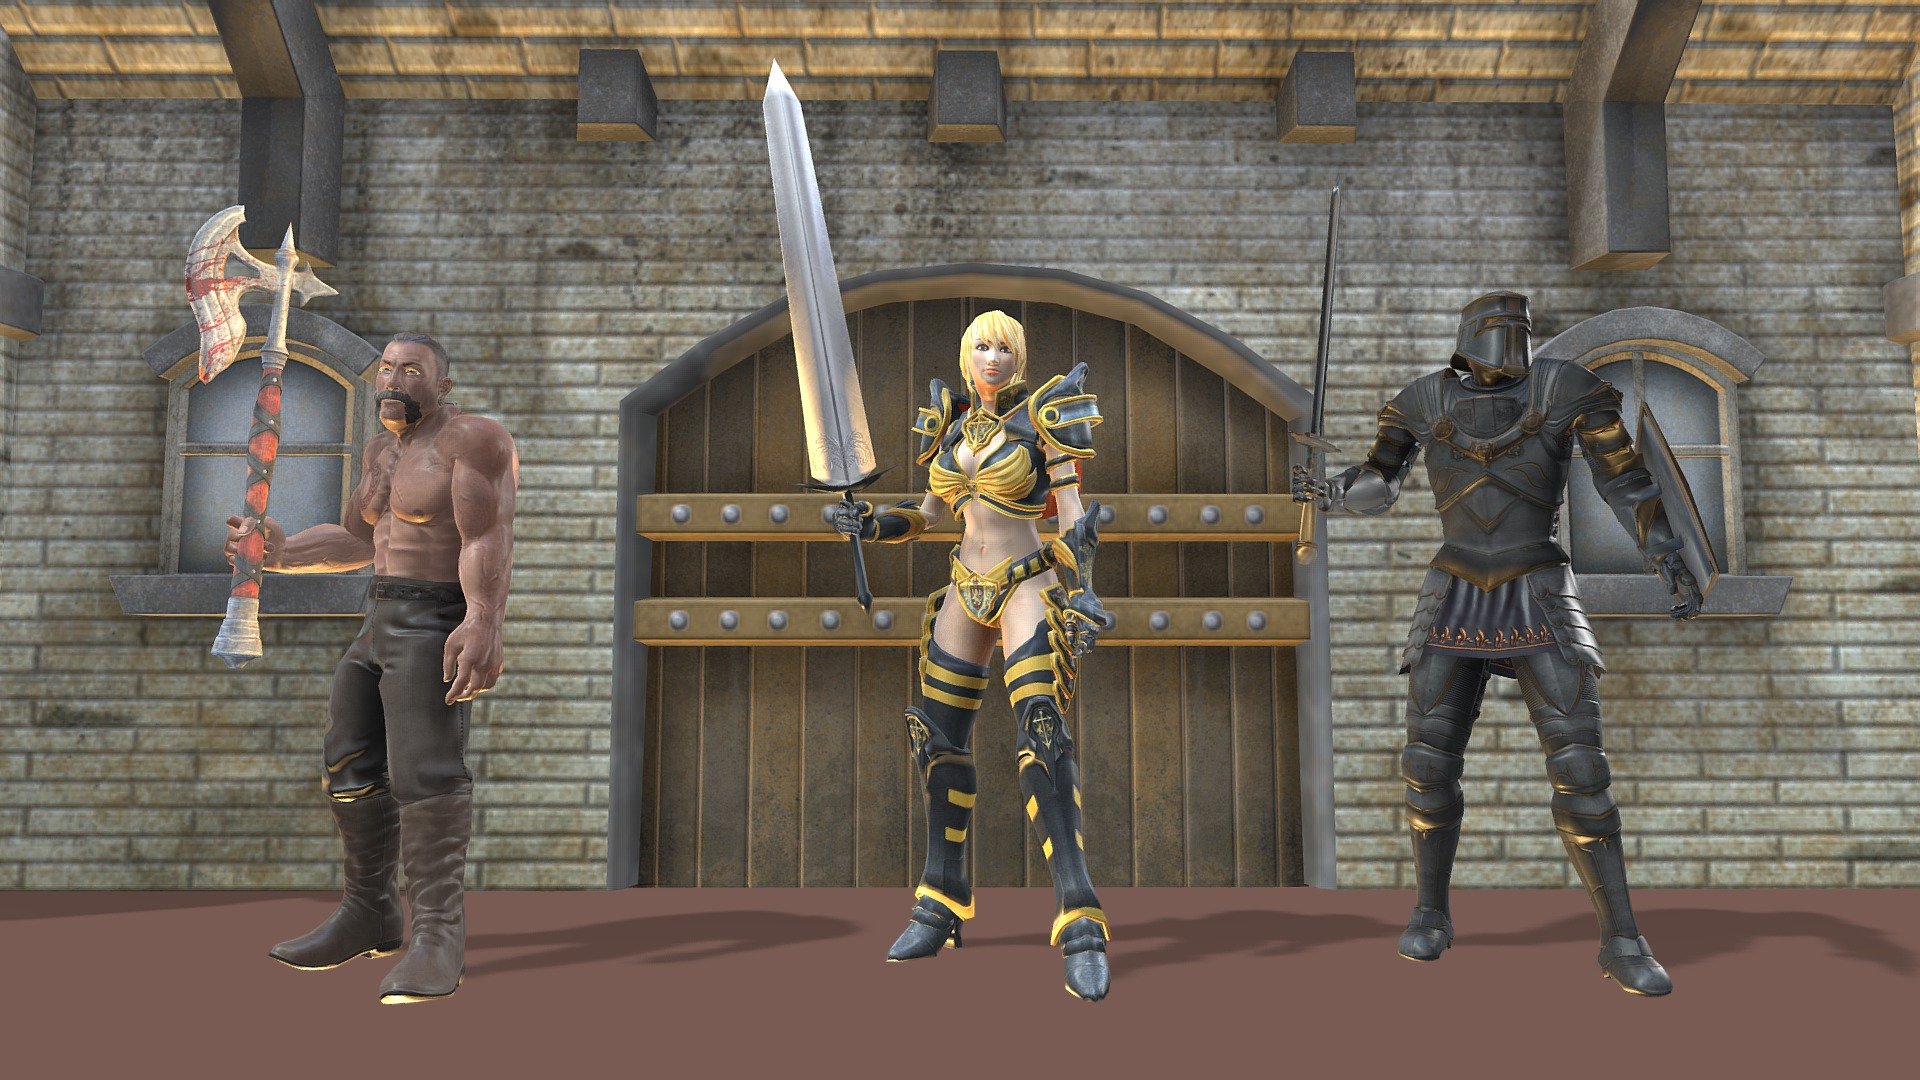 An Animated loop of 3 Super Heroes with their Blades Guarding a Castle with a battle axe, a broad sword and a knight in a suit of armor with sword and shield 3d model